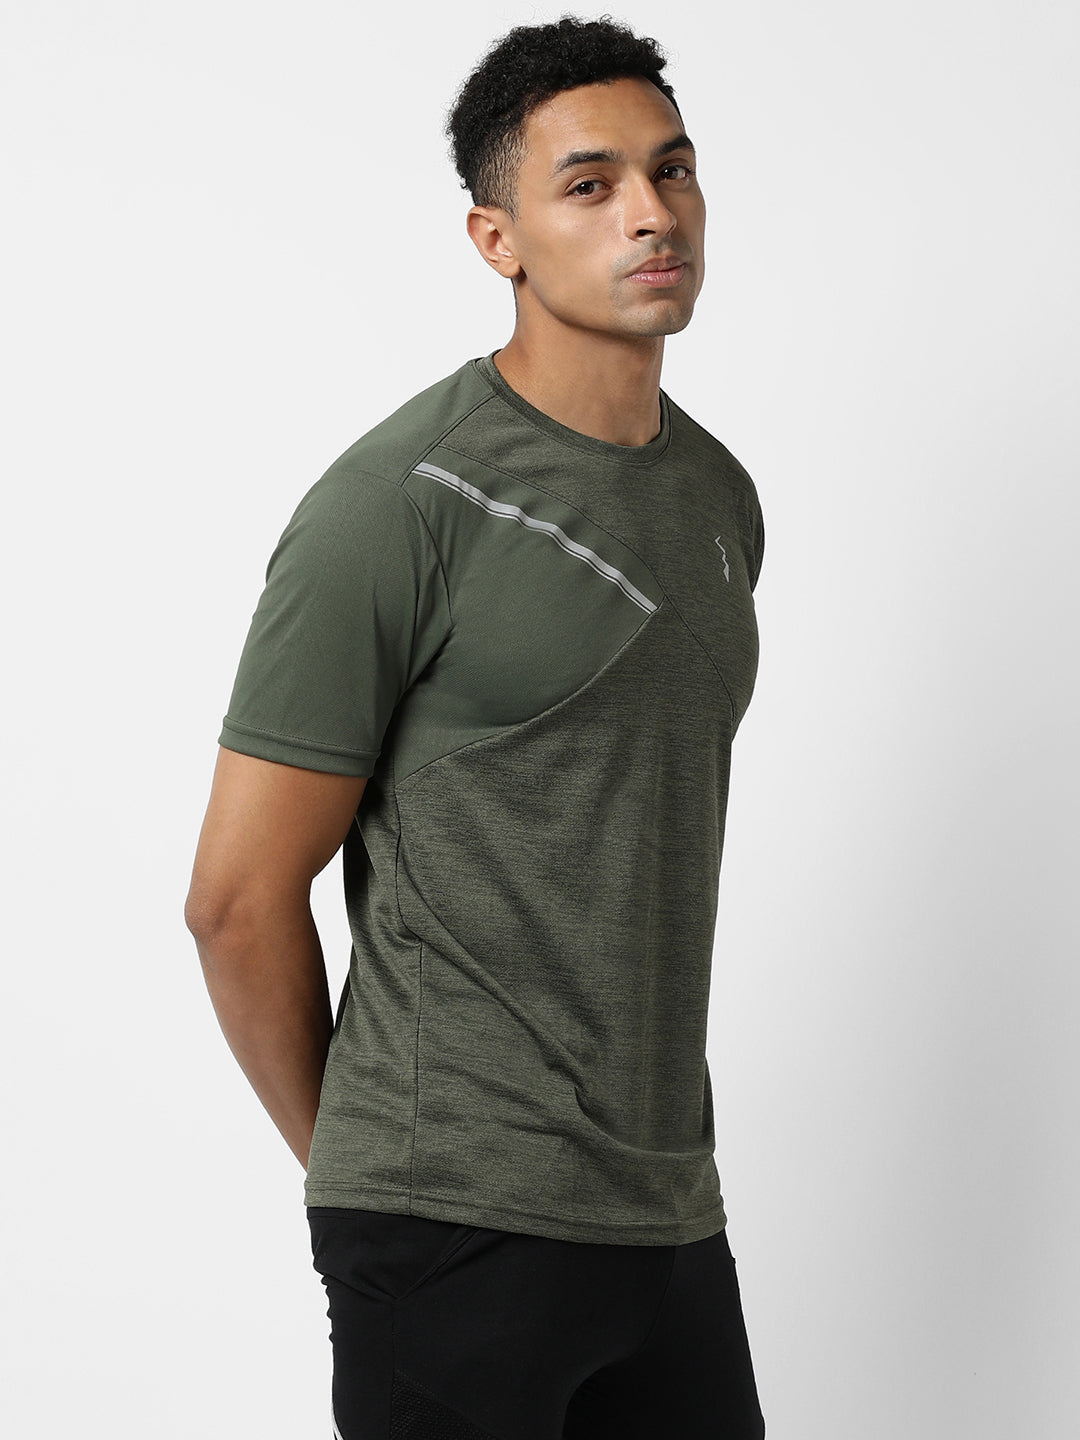 Contrast Heathered Activewear T-Shirt